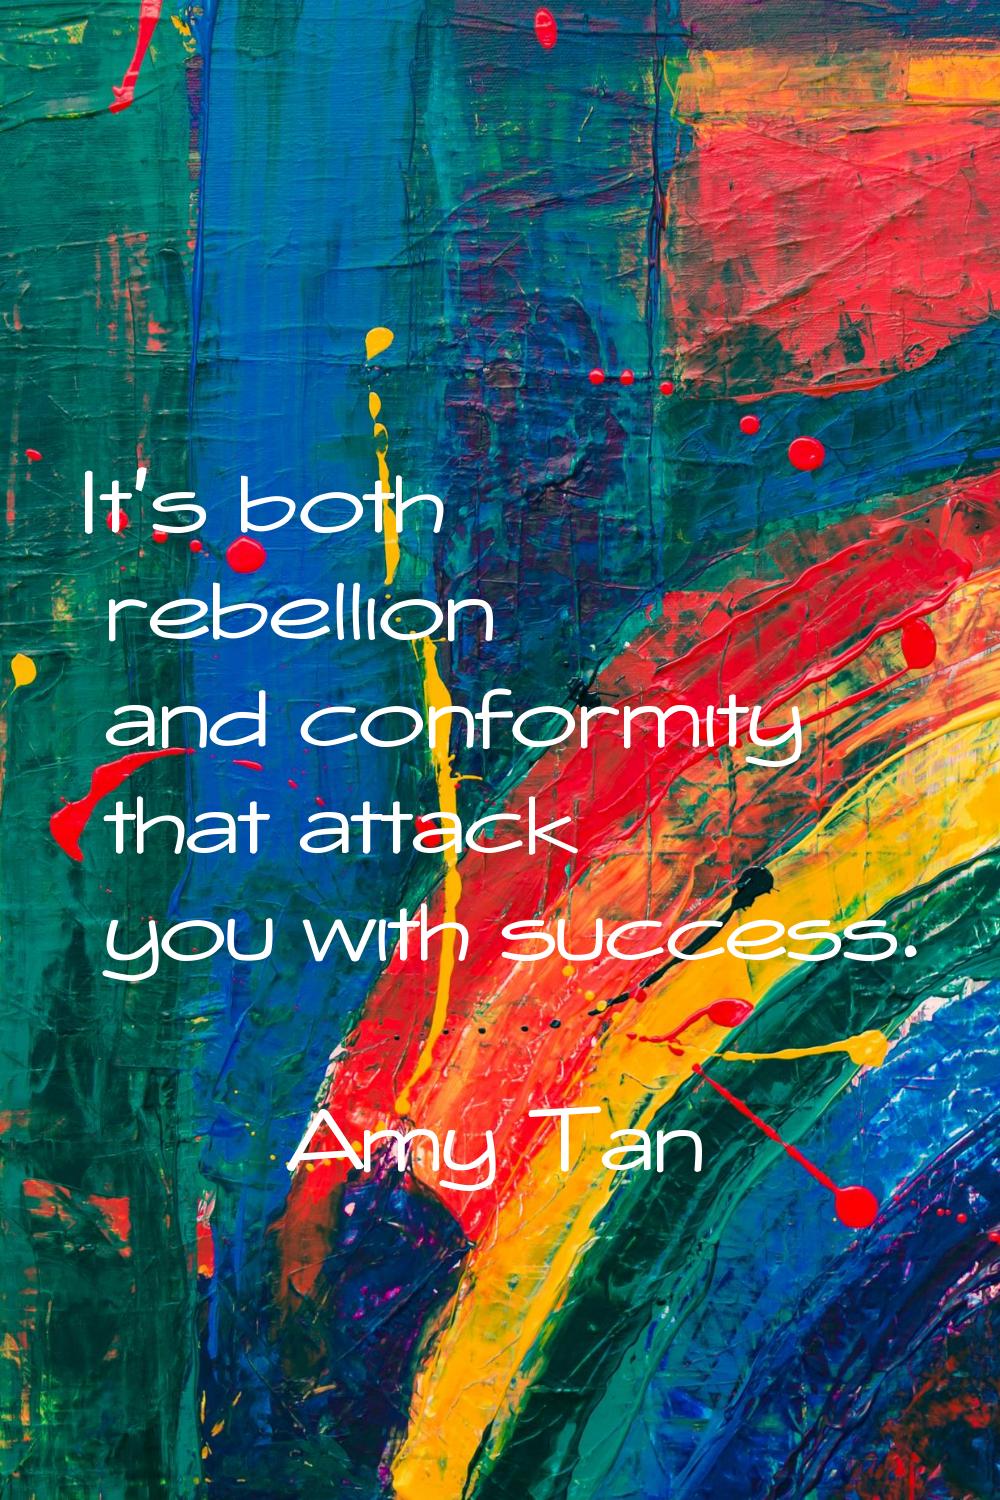 It's both rebellion and conformity that attack you with success.